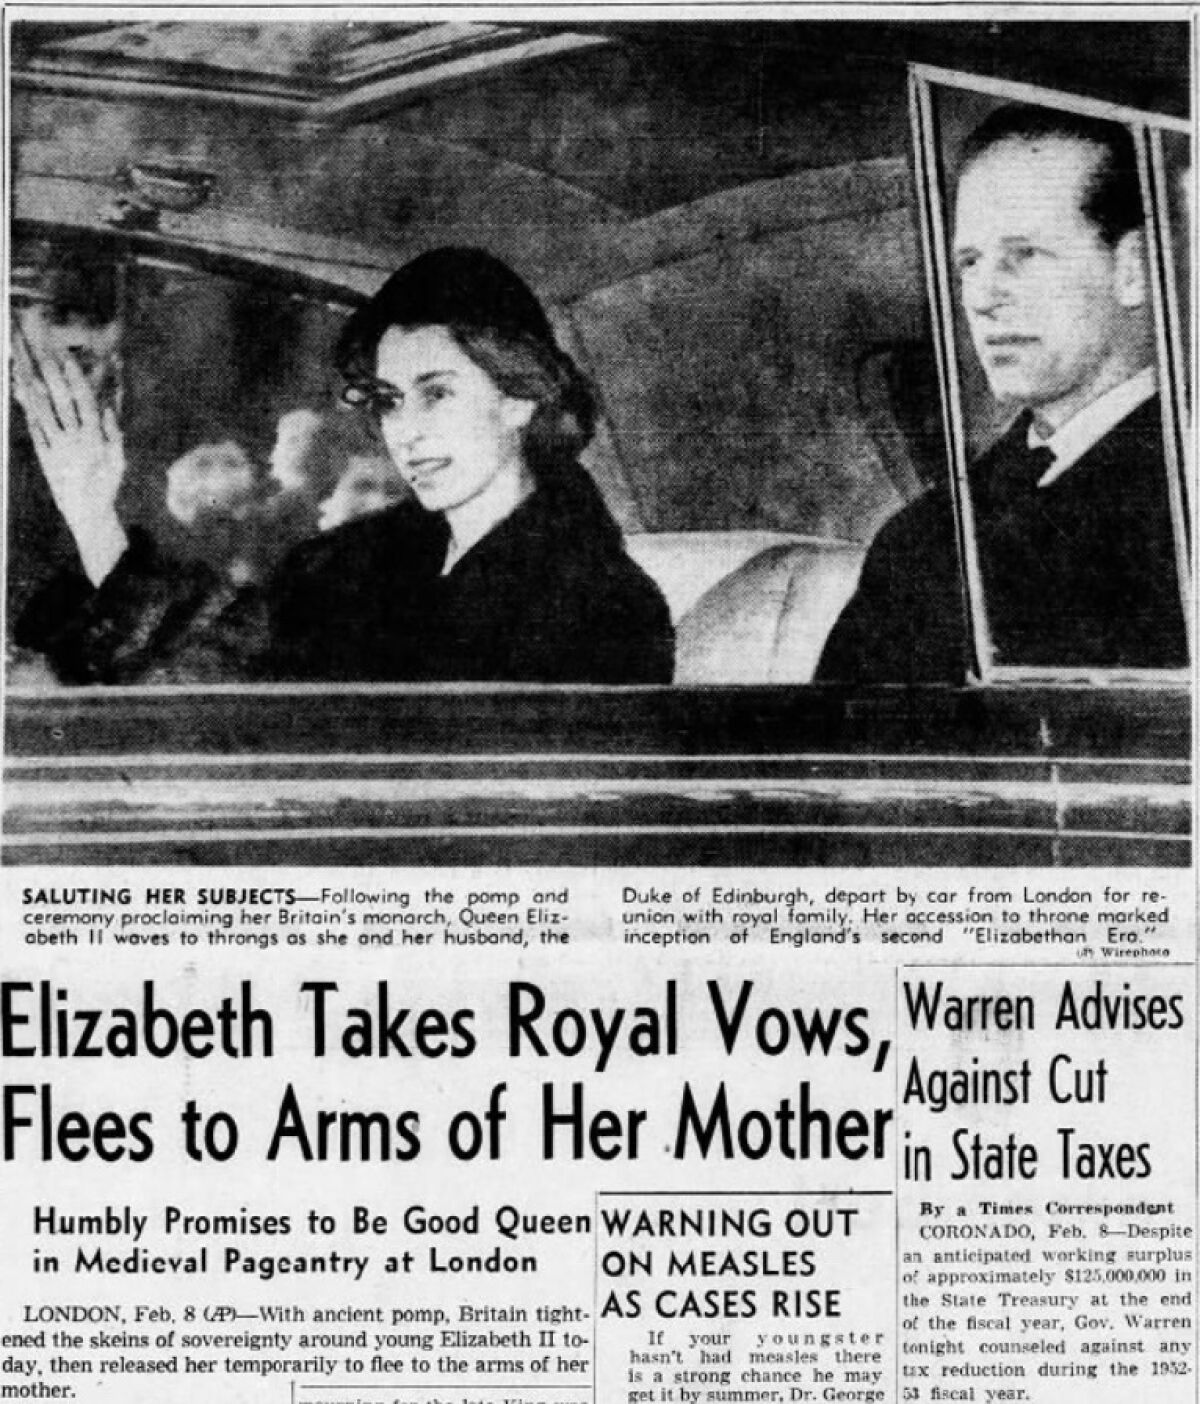 A picture of Queen Elizabeth II on the front page of the Feb. 9, 1952 issue of the Los Angeles Times.